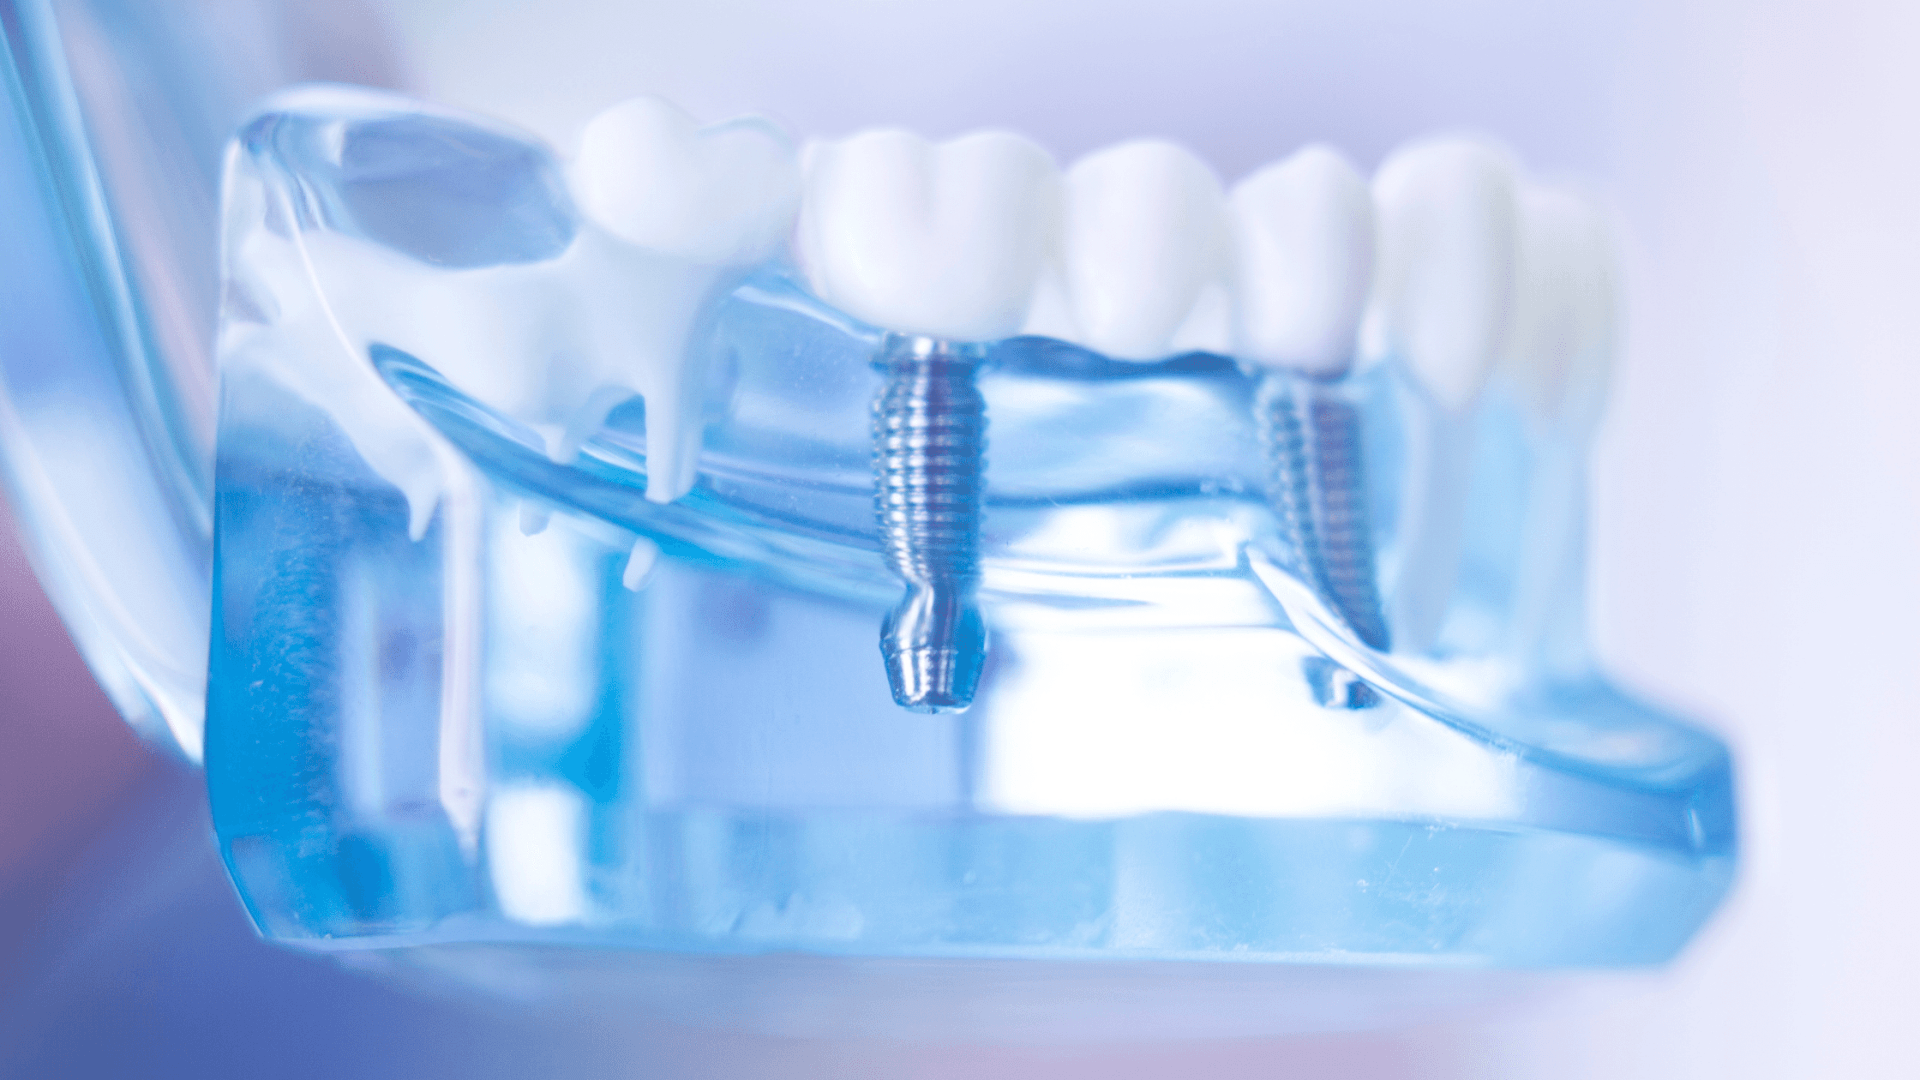 different types of dental implants: all-on-4 all on 4 brooklyn